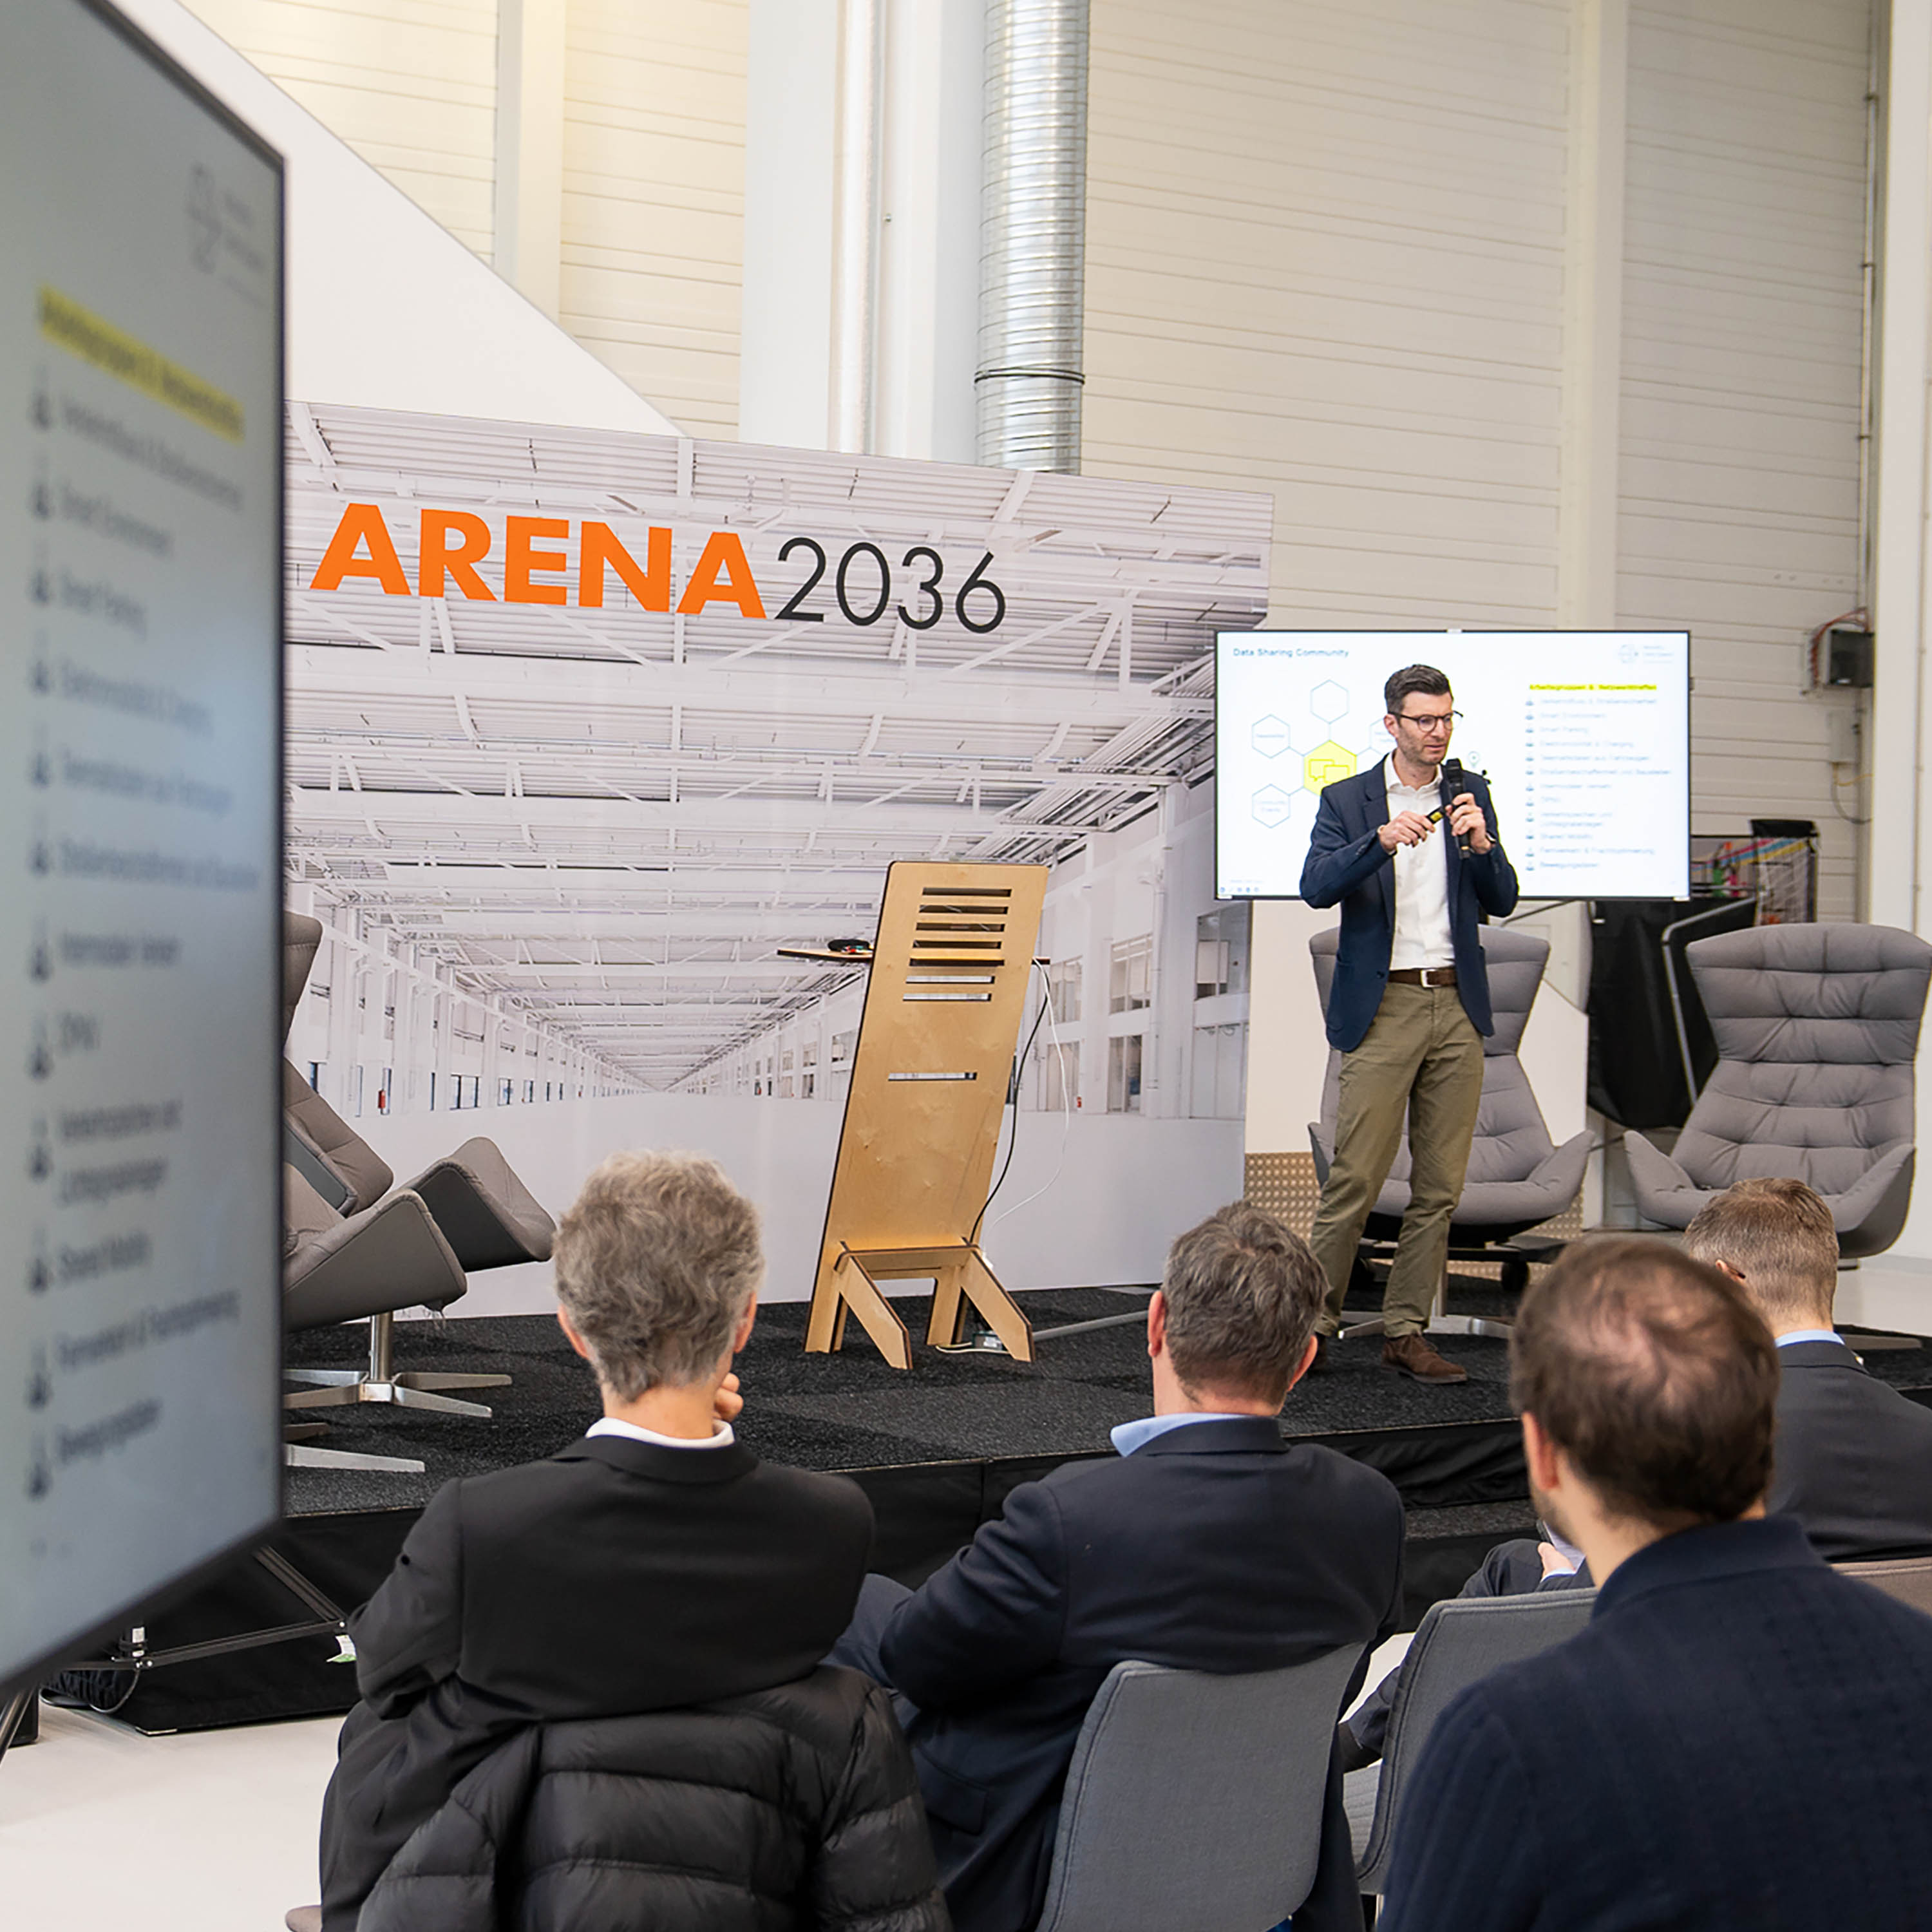 The picture shows a small stage on which a man is speaking into a microphone. Behind him there is a banner saying "ARENA 2036" and a television showing a presentation. The audience is seated on chairs in front of him. On the far left of the picture is a second screen showing the same presentation as on the stage.